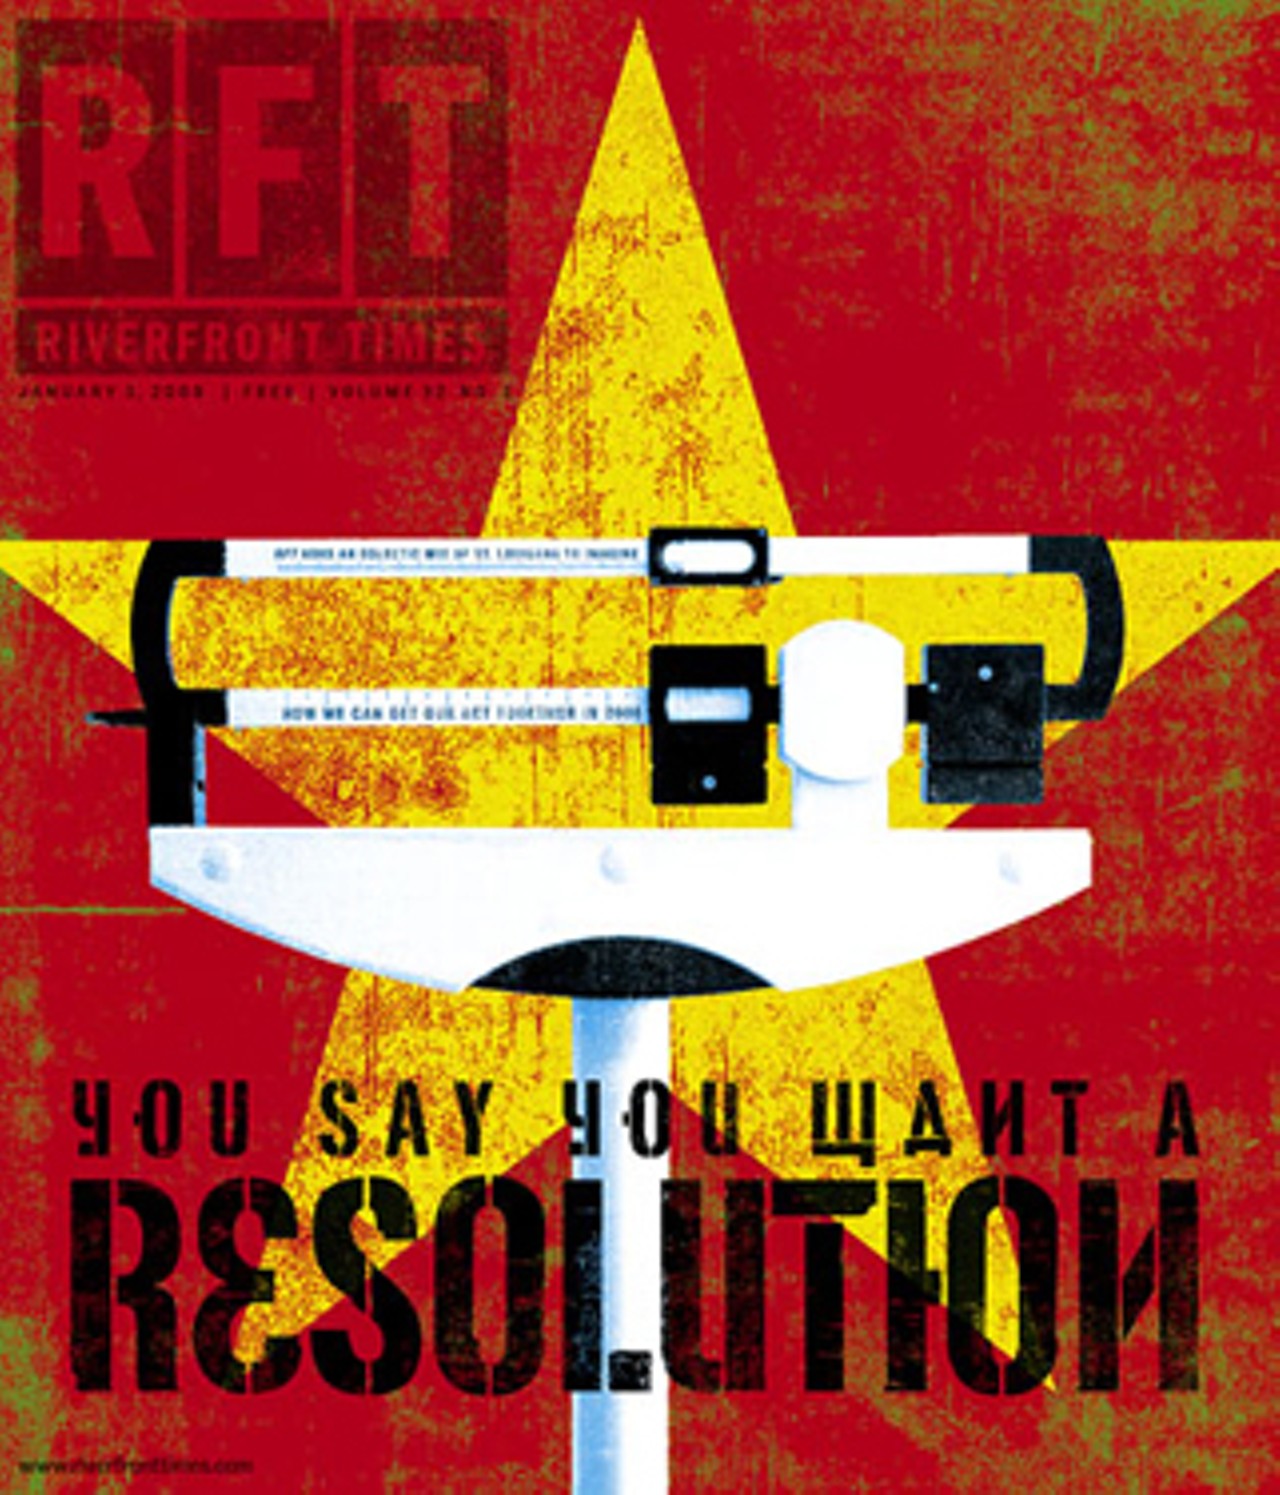 Aimee Levitt asked several notable St. Louisans about their resolutions for 2008 in You Say You Want a Resolution. January 3.